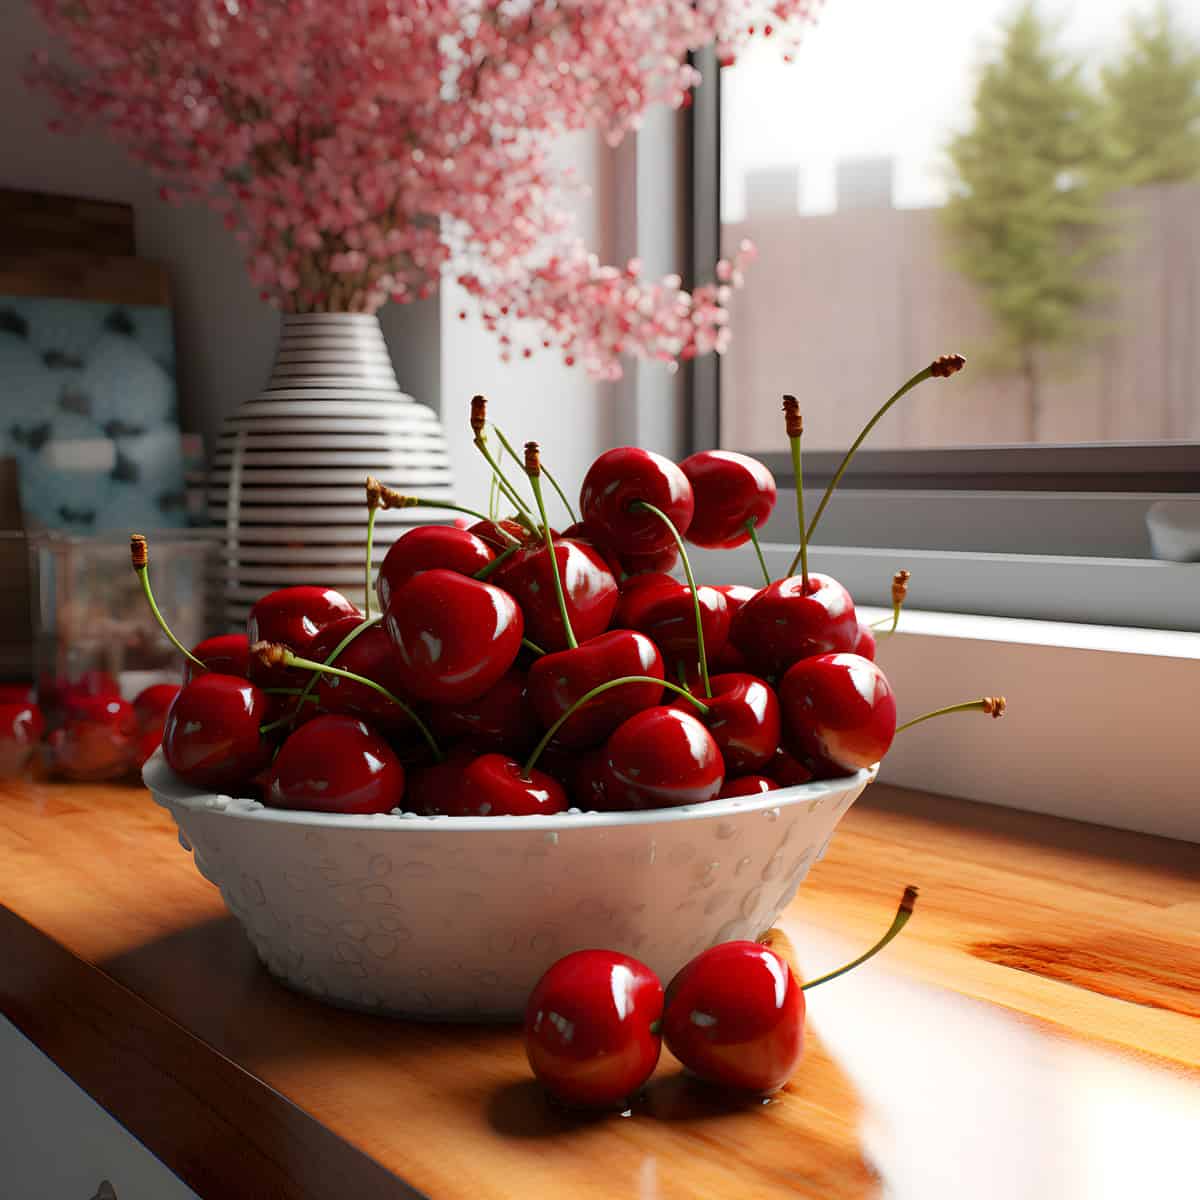 Terengganu Cherry on a kitchen counter